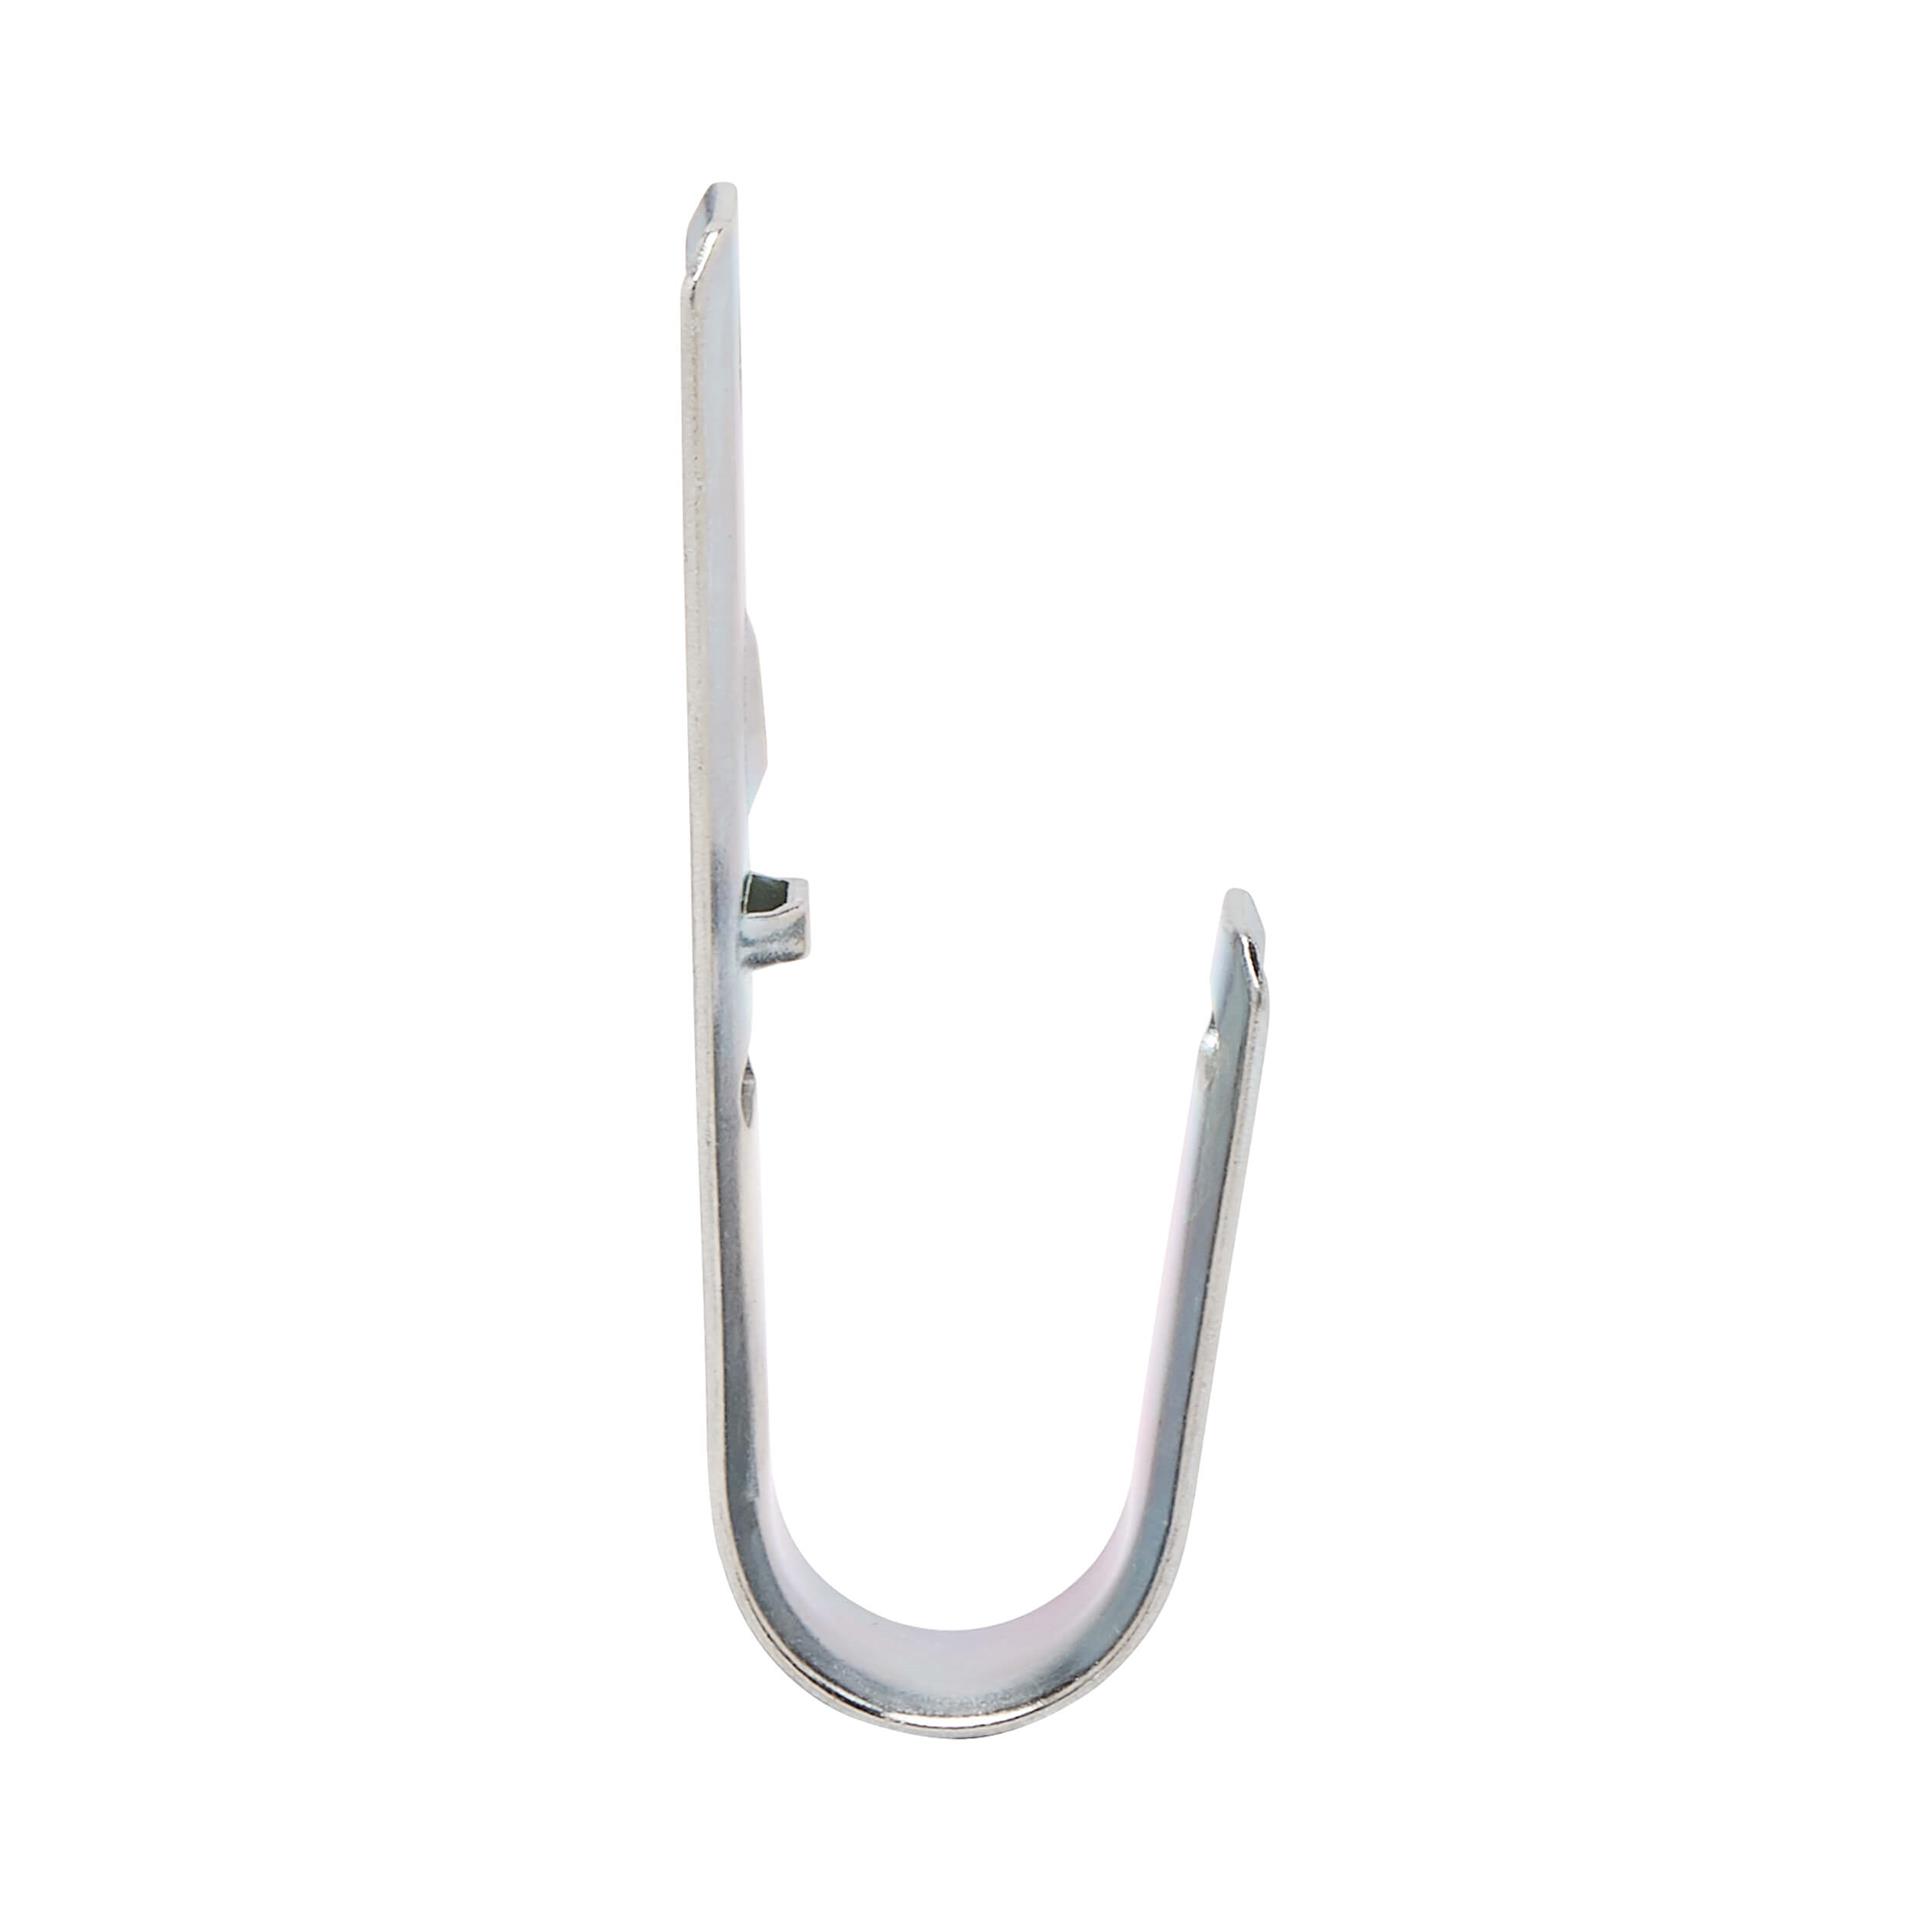 https://www.cmple.com/content/images/thumbs/wavenet-34-j-hook-cable-support-wall-mount-wiring-retainer-with-fix-clip-for-cat6-cat5e-optic-networ_NID0015600.jpeg